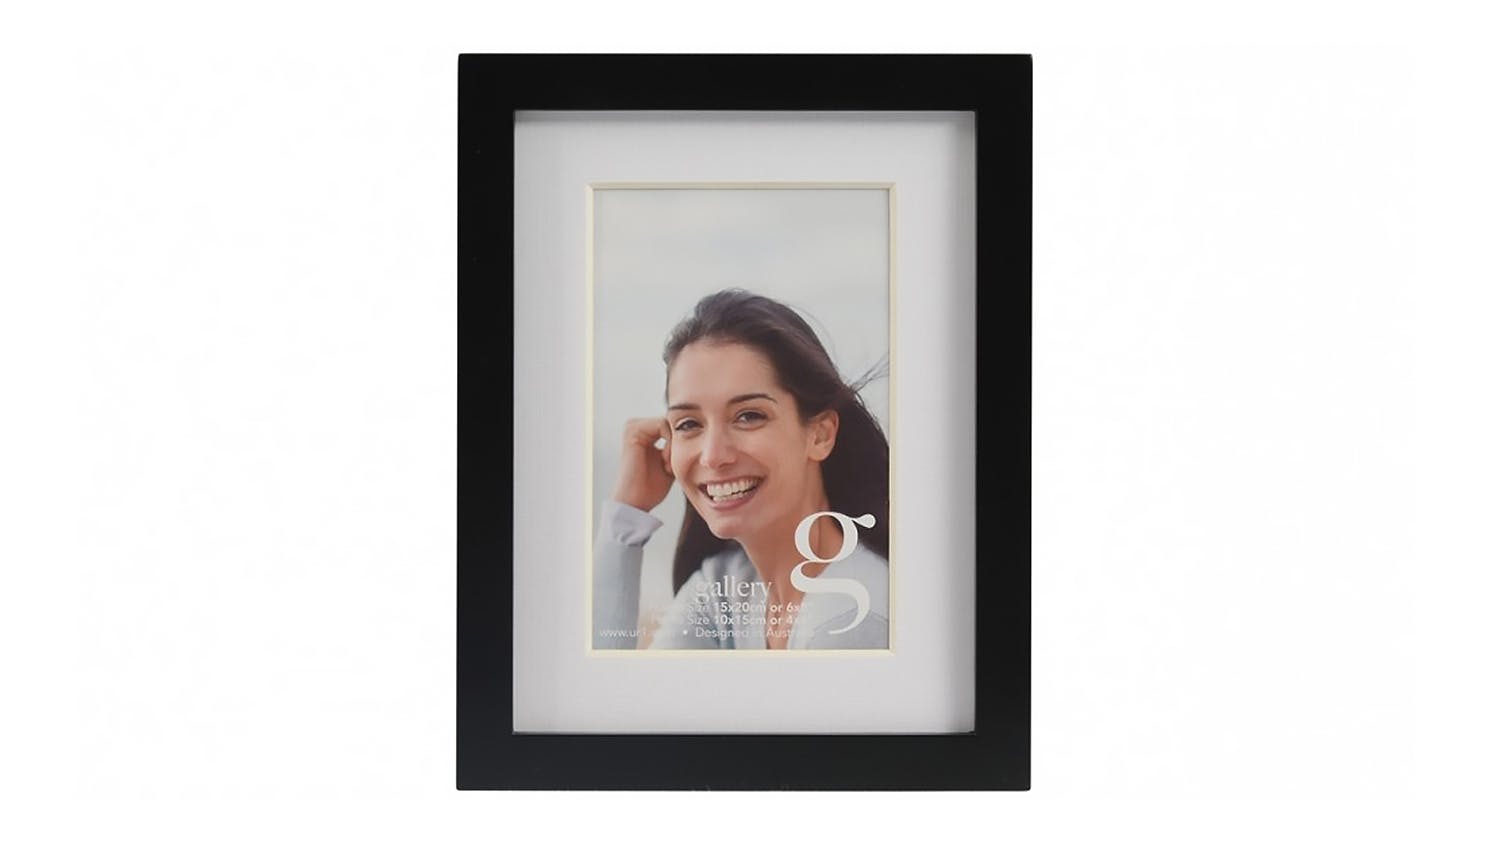 UR1 Gallery 6x8 Photo Frame with 4x6 Opening - Black